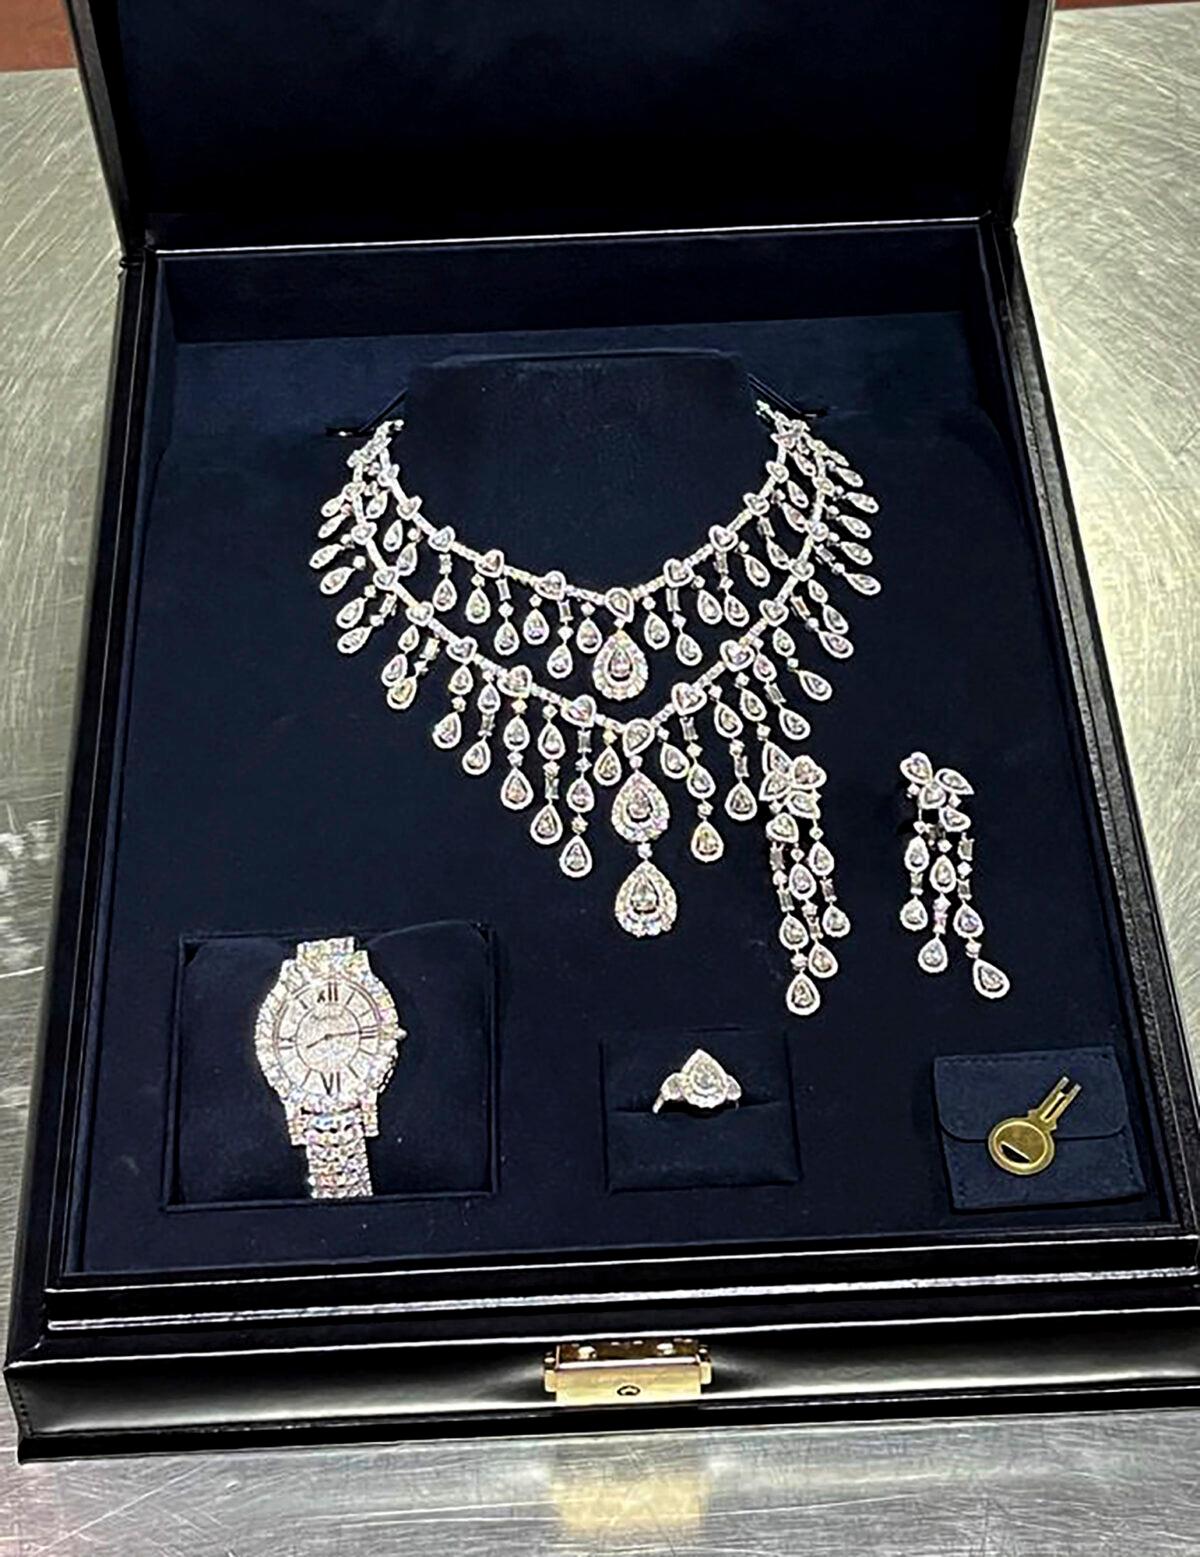 Jewelry seized by customs authorities at Guarulhos International Airport in Sao Paulo on the week of March 24, 2023. (Brazil's Federal Revenue Department via AP)